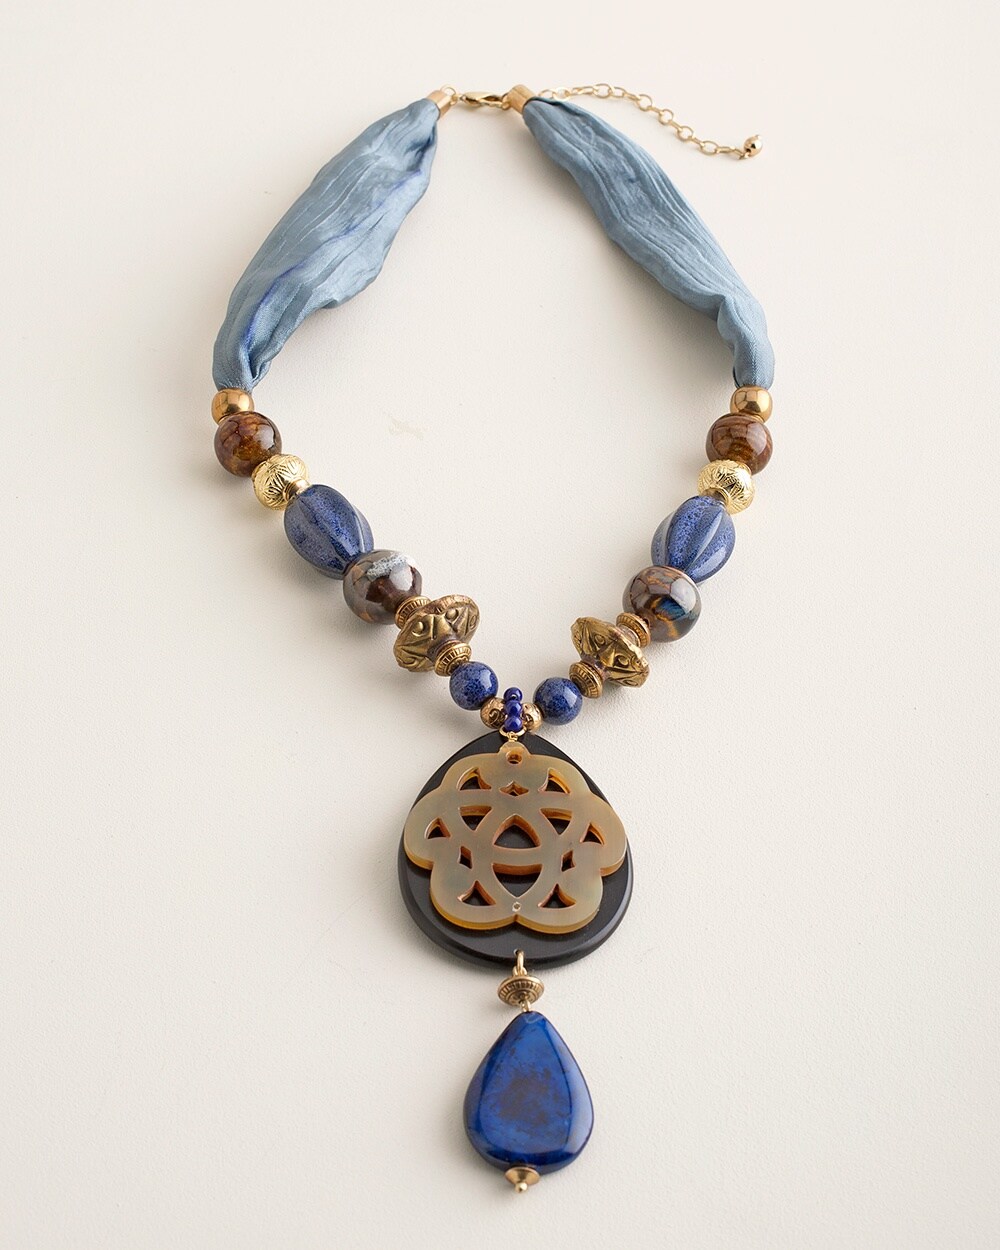 Short Blue and Neutral Pendant Necklace